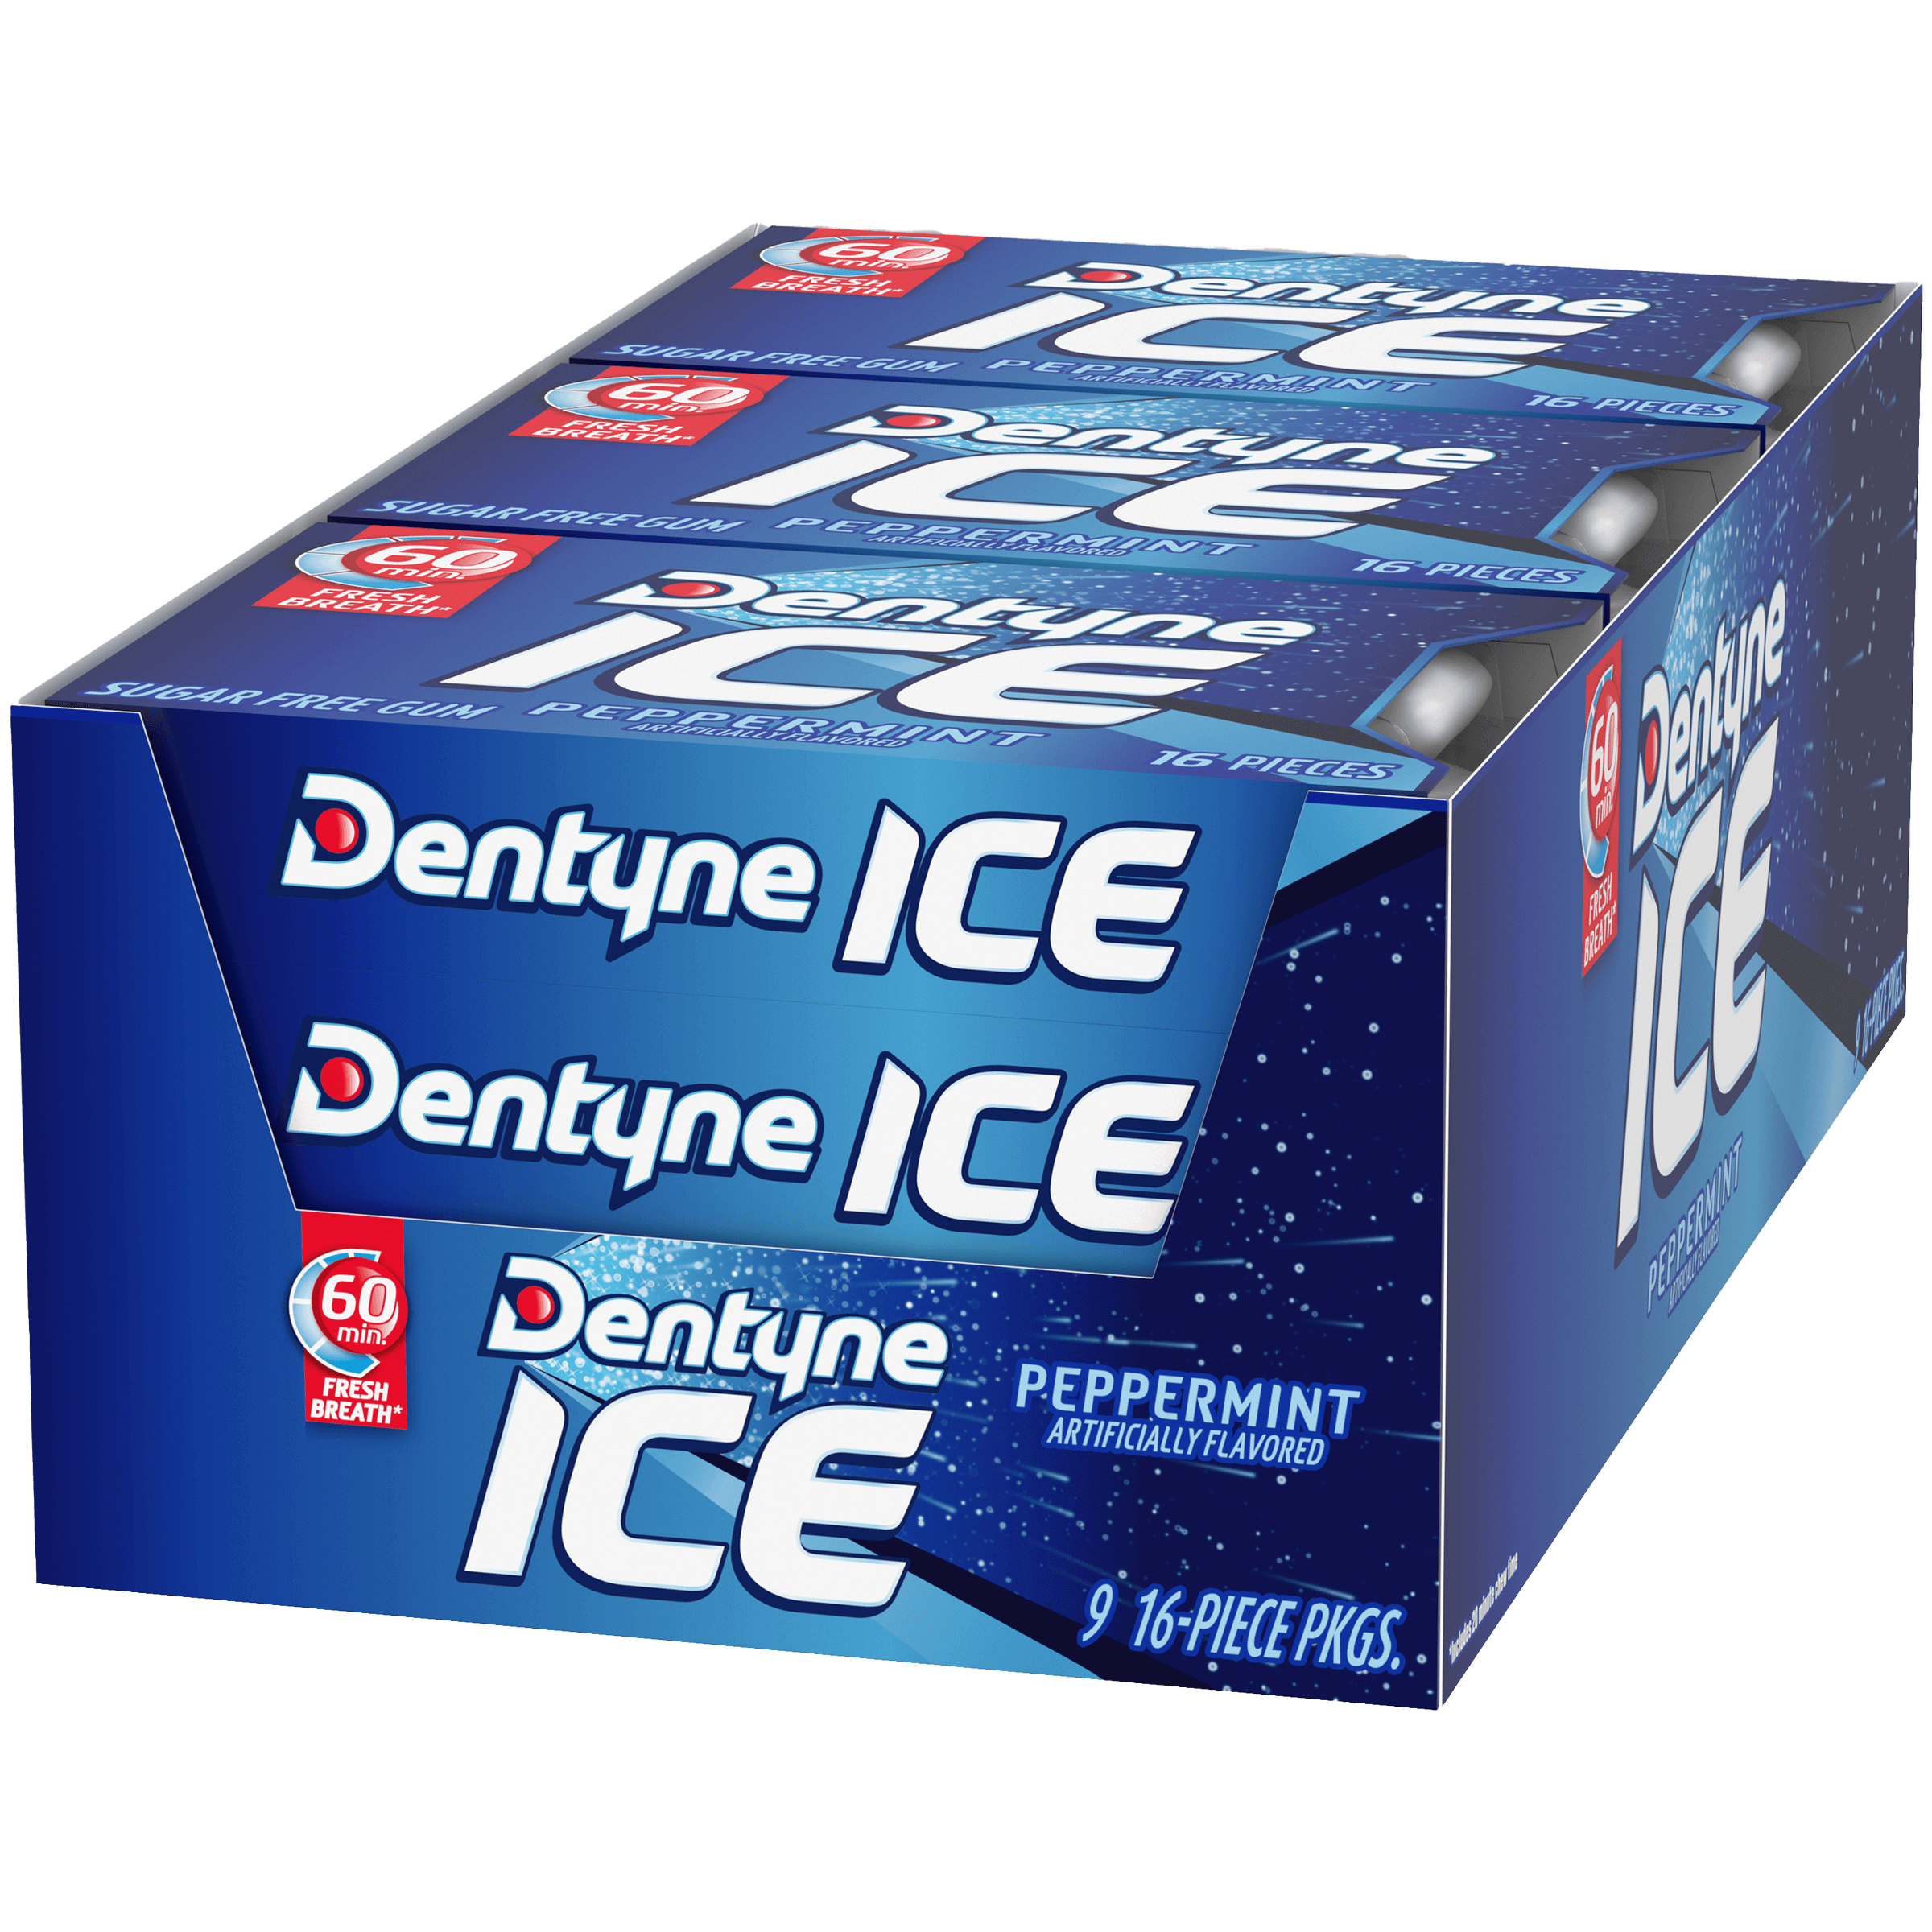 Dentyne Ice Peppermint (16 piece, pack of 9)